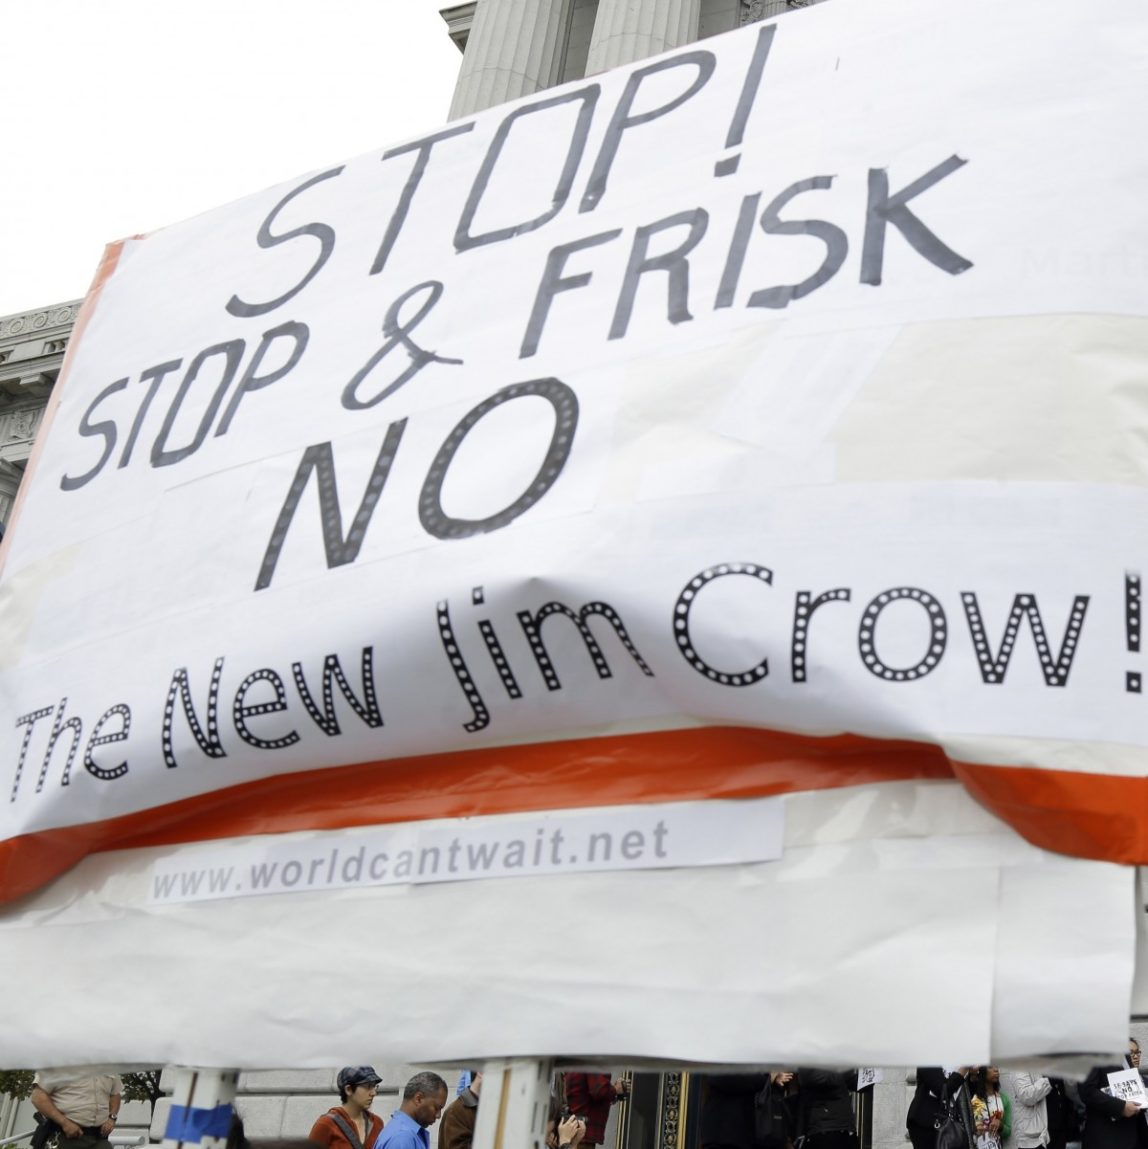 A rally in opposition to stop-and-frisk takes place outside of city hall in San Francisco, Tuesday, July 17, 2012. (AP Photo/Marcio Jose Sanchez)